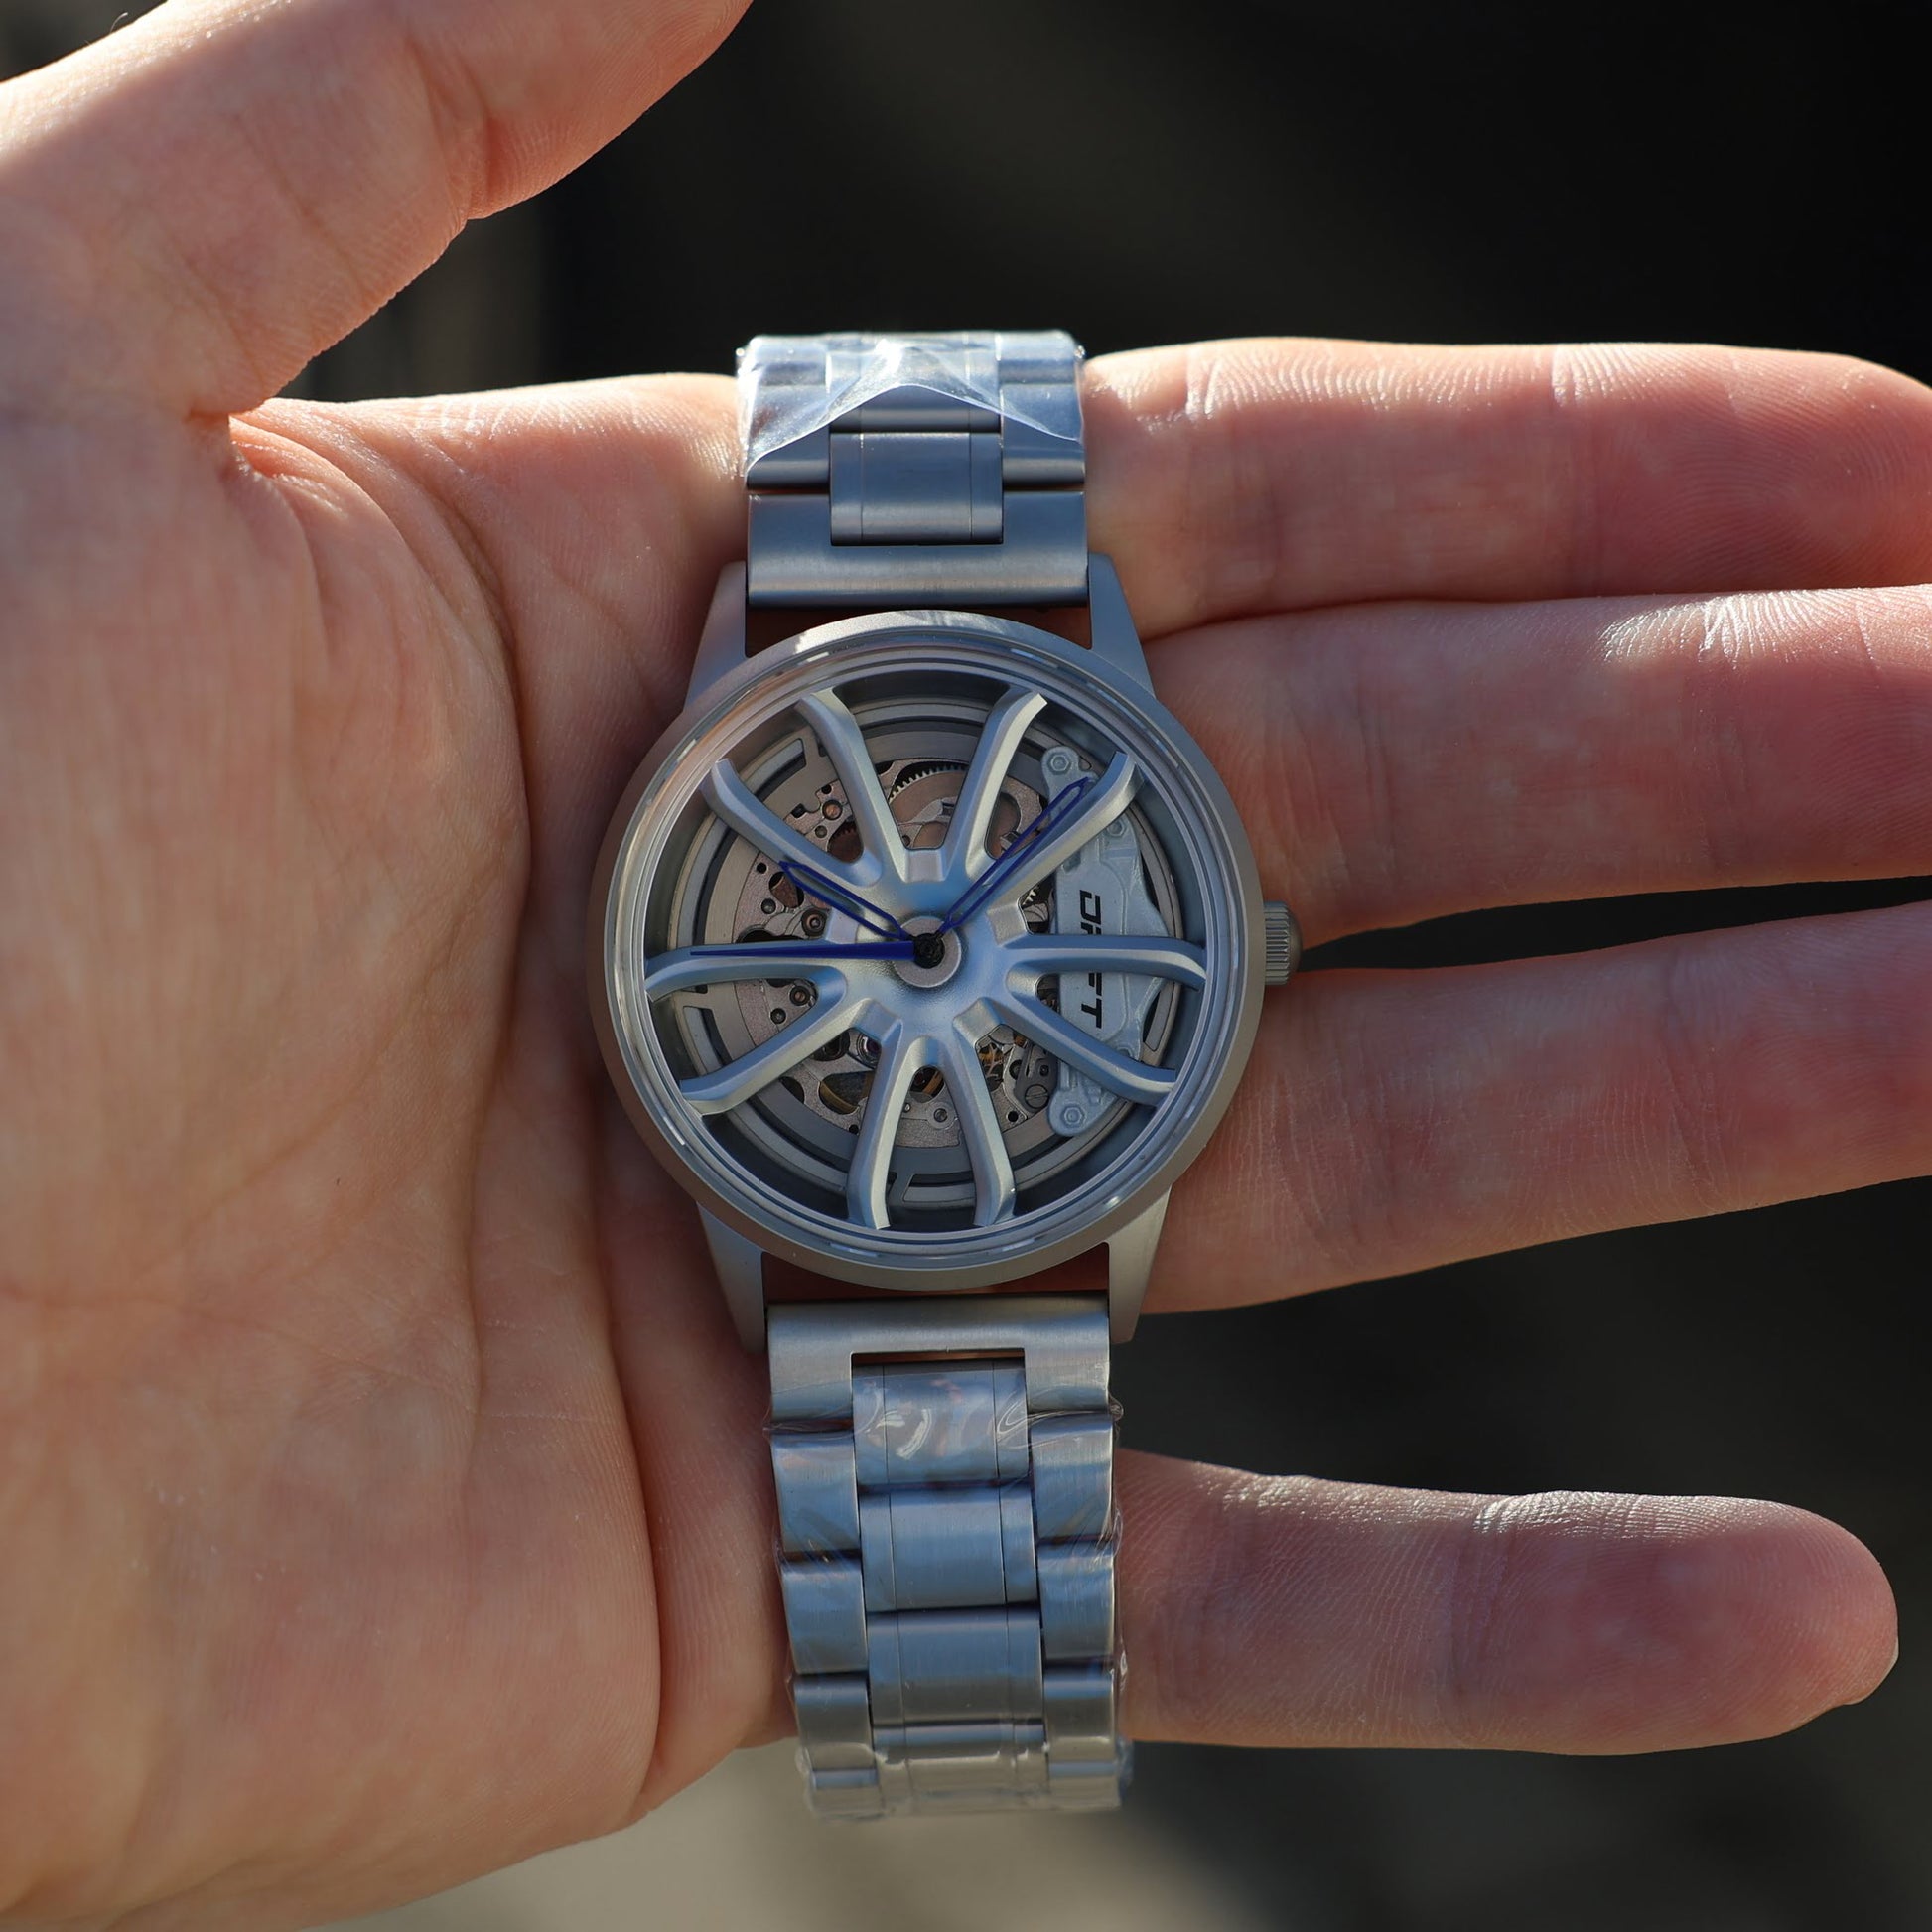 This particular model, suitable for showcasing at events like the PGT Essen Motor Show, features a distinct wheel rim-inspired face, with the watch mechanisms visible through the rim patterns. It has a silver-tone metal bracelet and a case, with blue watch hands adding a pop of color to the design. This watch is a prime example of DriftElement's commitment to combining automotive passion with horology, presenting a design that is both contemporary and mechanically driven.